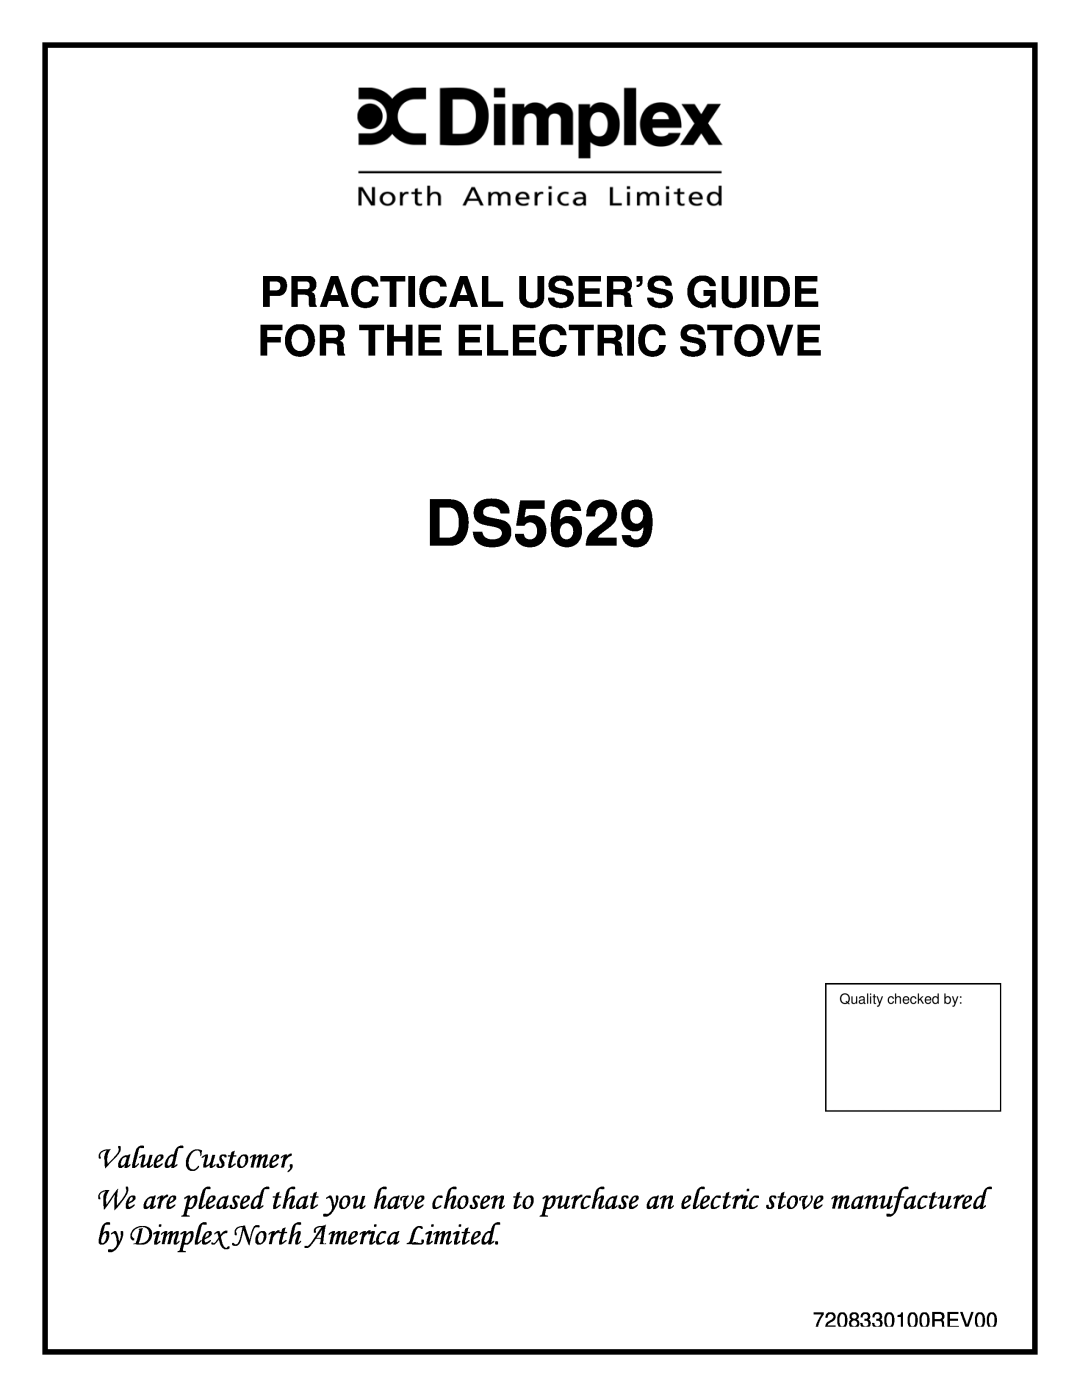 Dimplex DS5629 manual Practical User’S Guide For The Electric Stove, Valued Customer, Quality checked by 